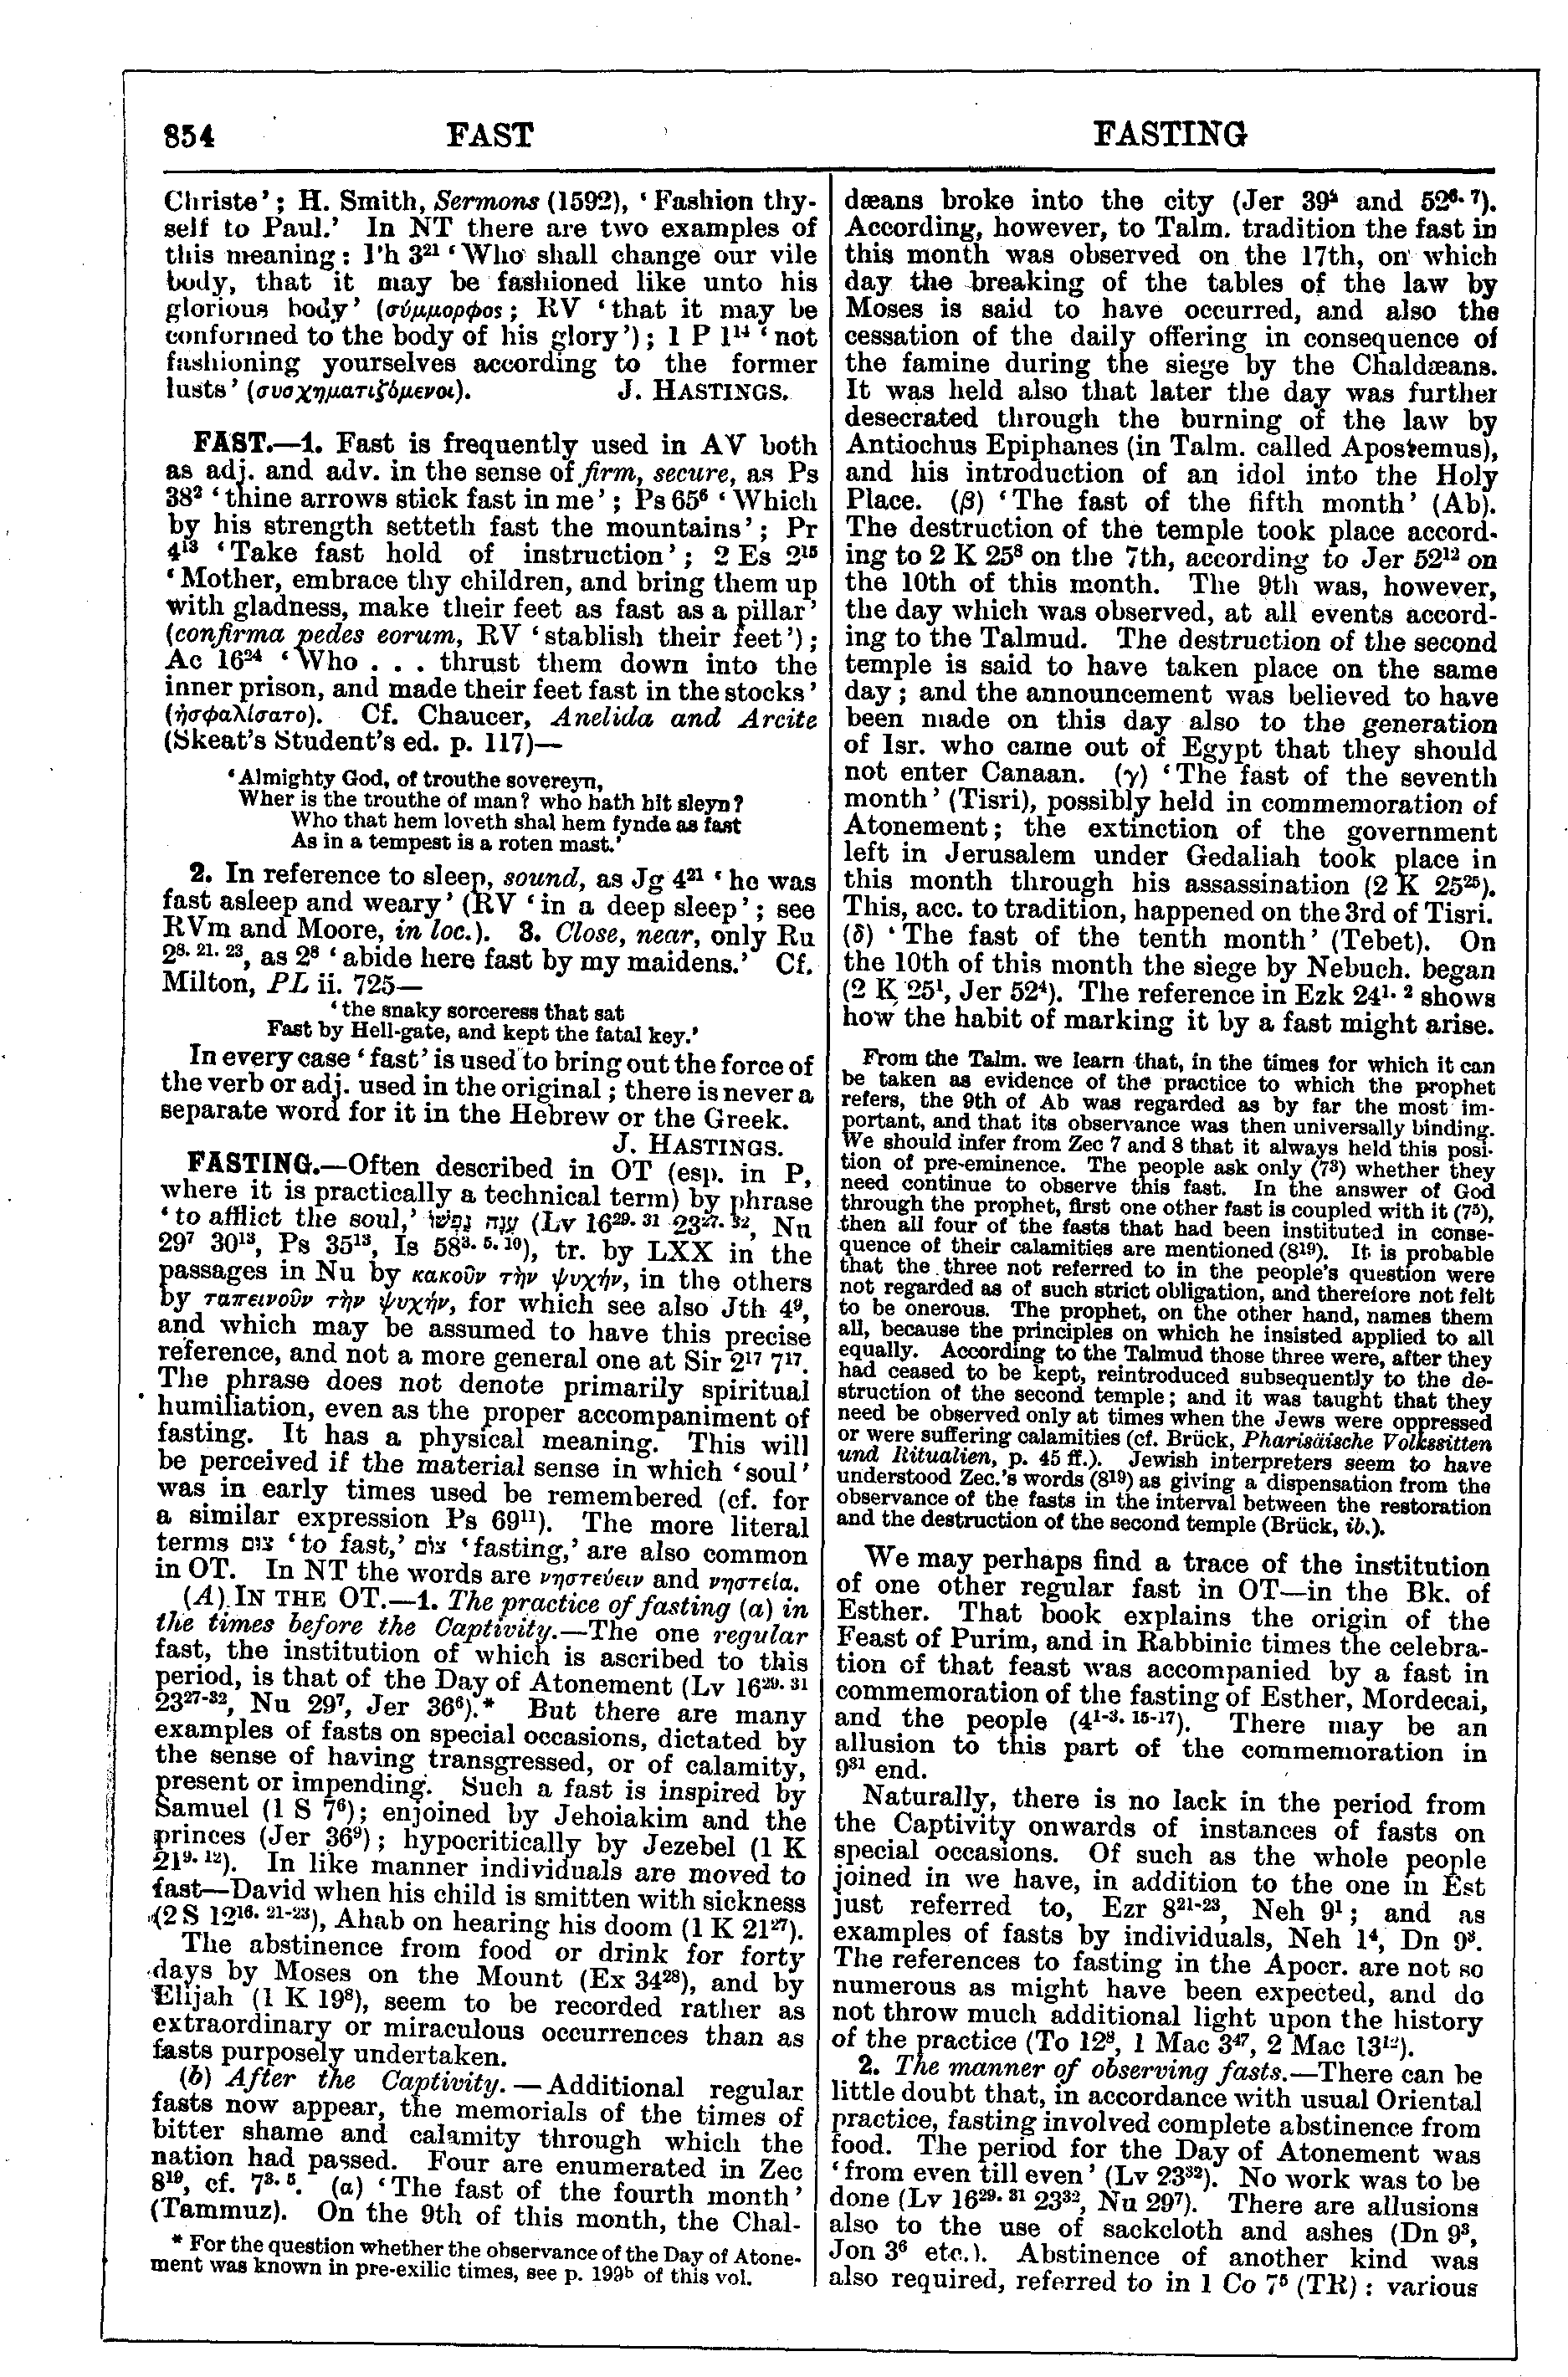 Image of page 854